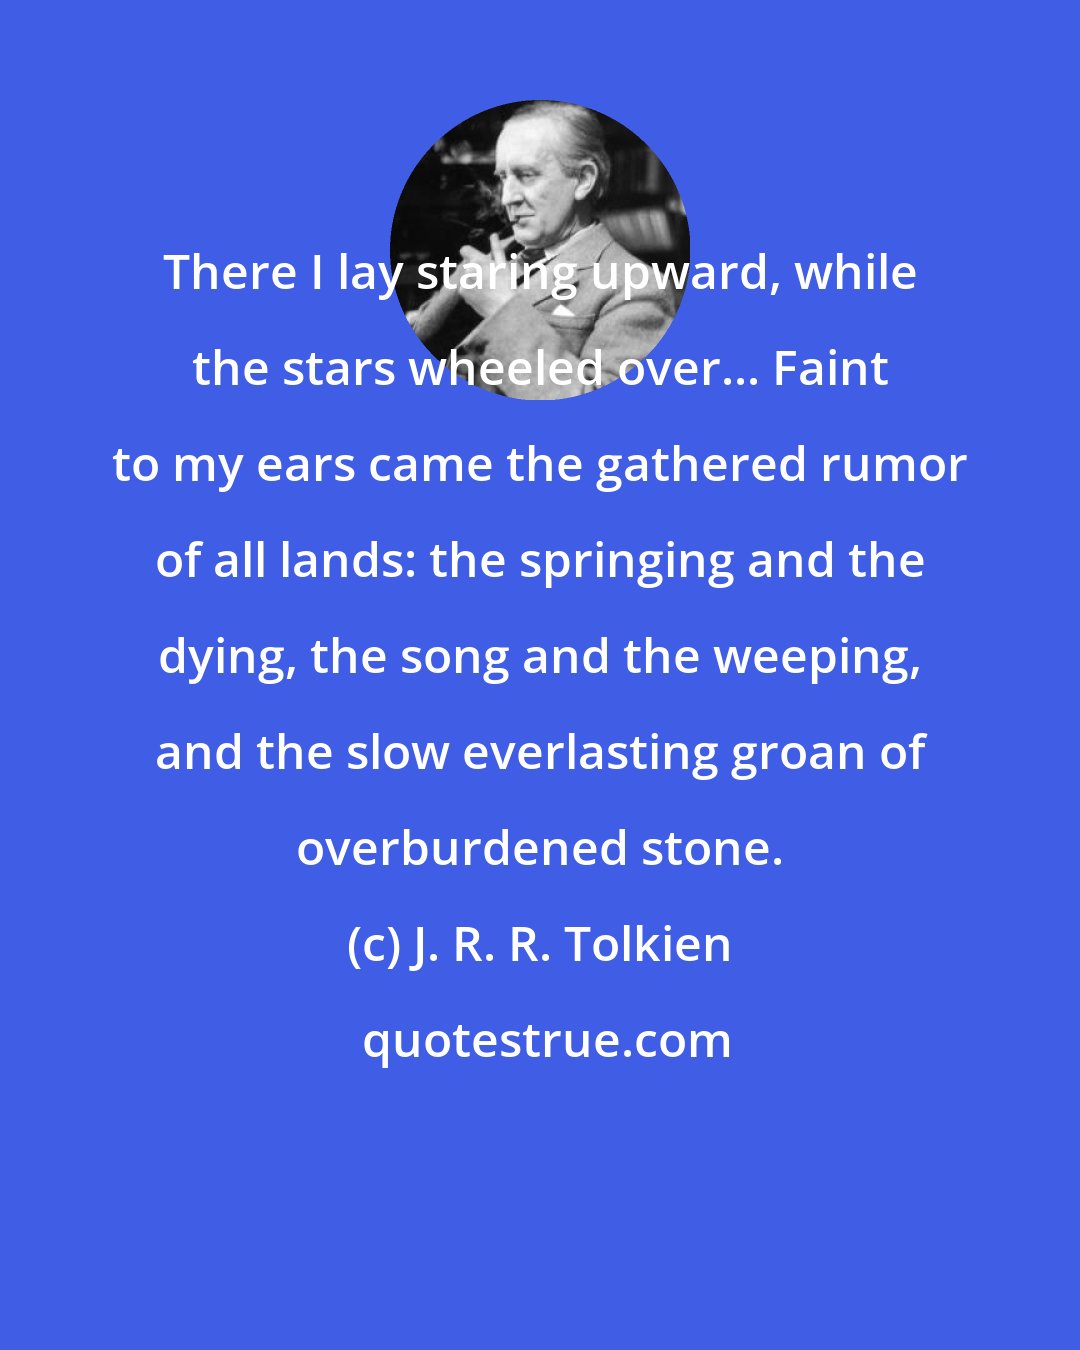 J. R. R. Tolkien: There I lay staring upward, while the stars wheeled over... Faint to my ears came the gathered rumor of all lands: the springing and the dying, the song and the weeping, and the slow everlasting groan of overburdened stone.